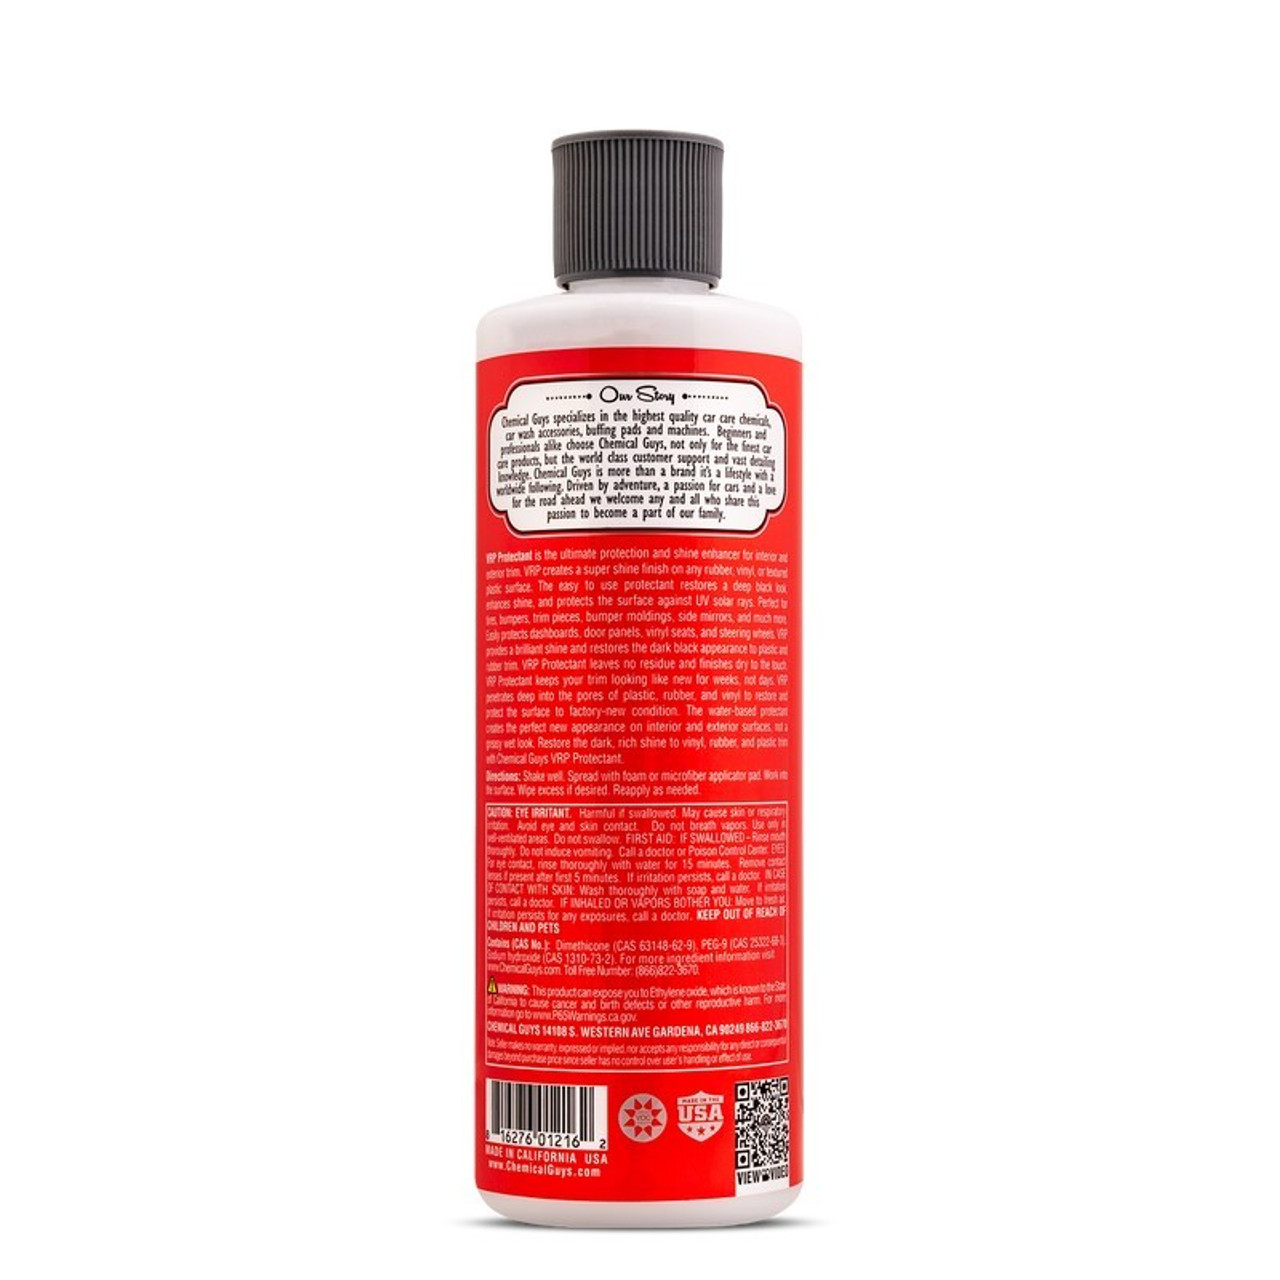  Chemical Guys PMWTVD10750 VRP Shine and Protectant